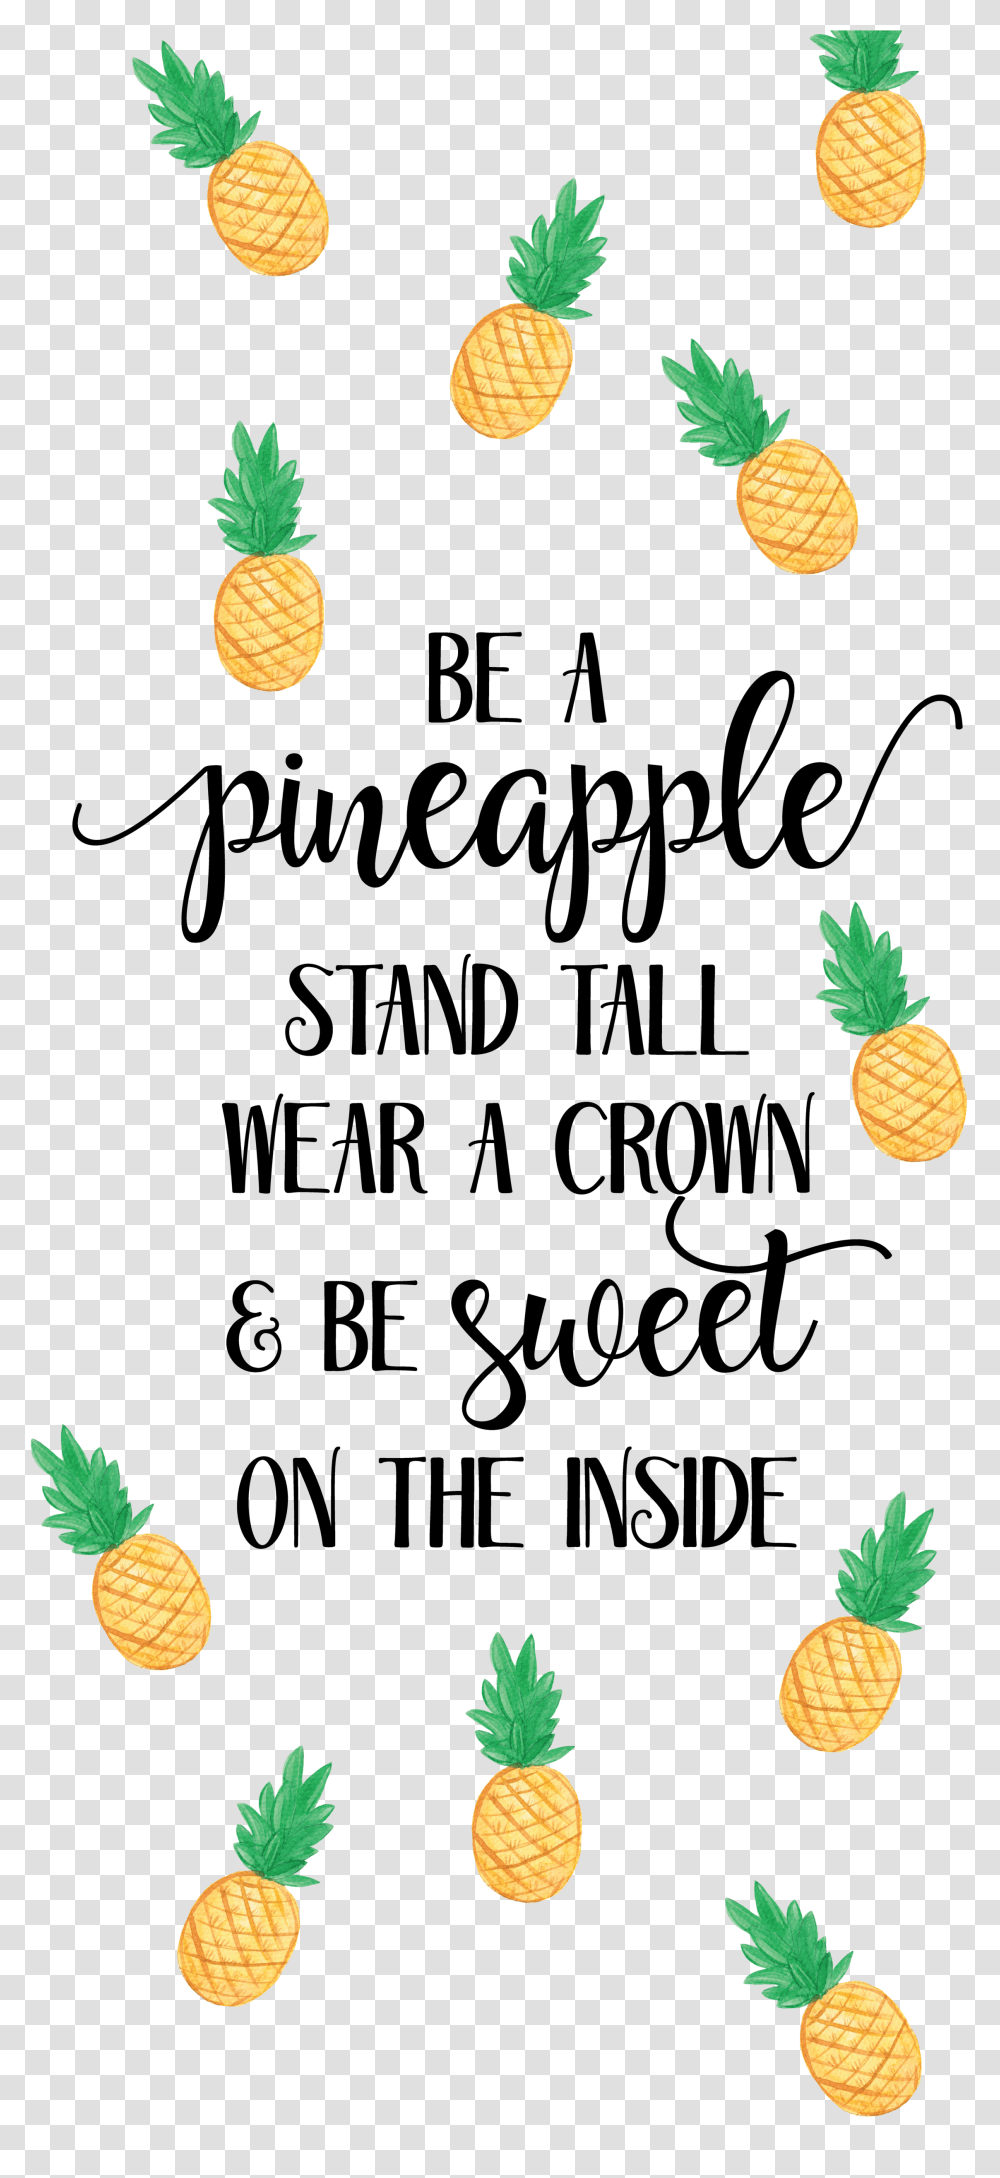 Pineapple Wallpaper Hd Wallpapers Pineapple Wallpaper Quotes, Plant, Vase, Jar, Pottery Transparent Png